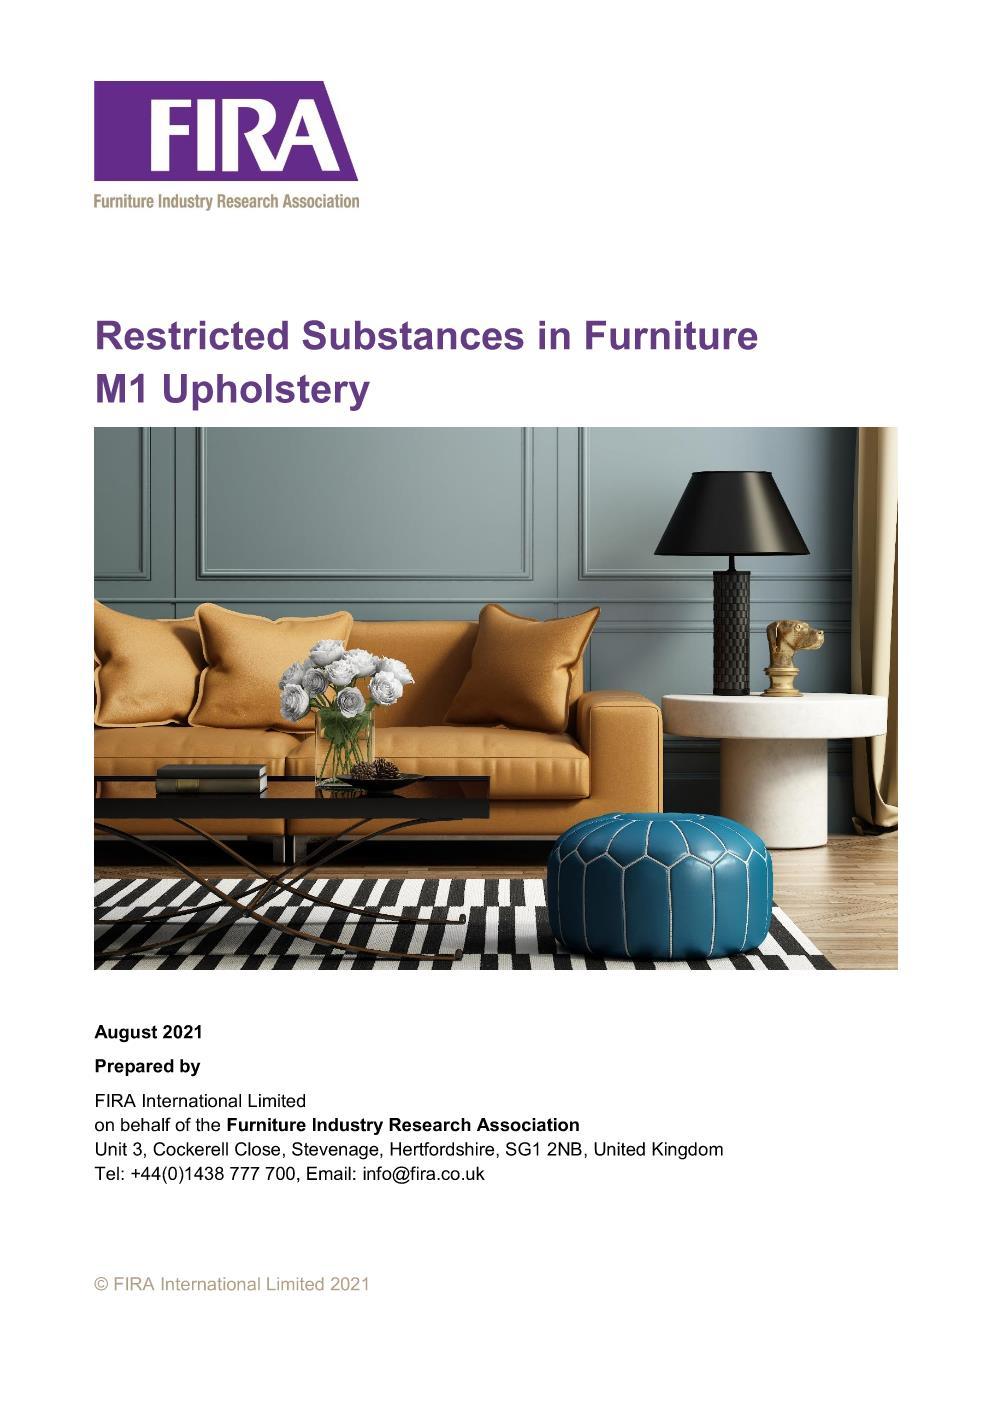 REACH: Restricted Substances in Furniture - M1 Upholstery